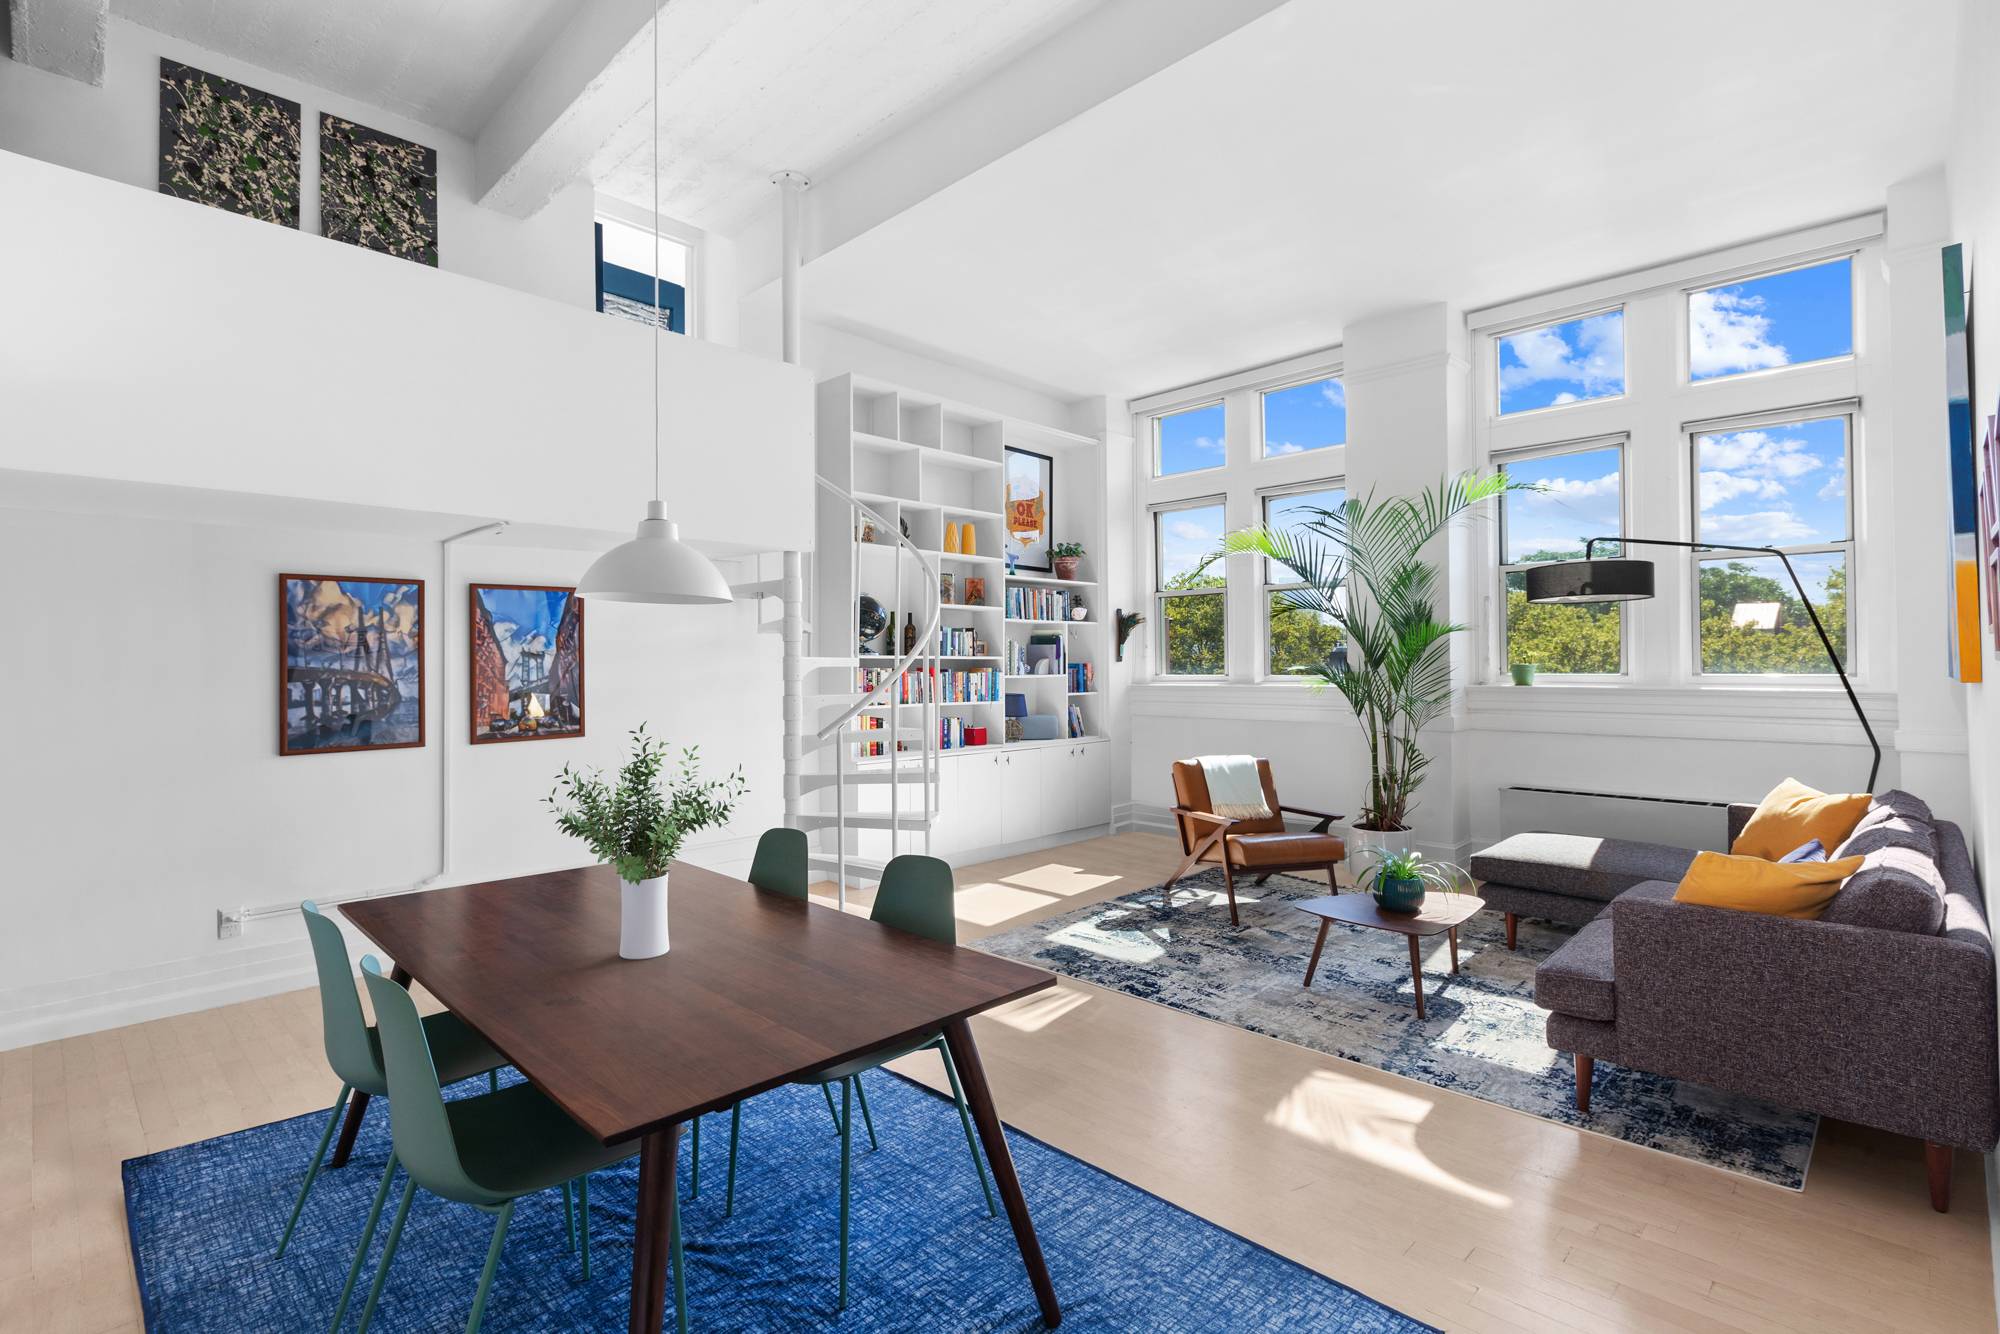 OPEN HOUSES BY APPOINTMENT ONLY A light amp ; airy two bedroom, two bathroom home with massively high ceilings plus flexible bonus lofted space in a Cobble Hill 1920 s ...